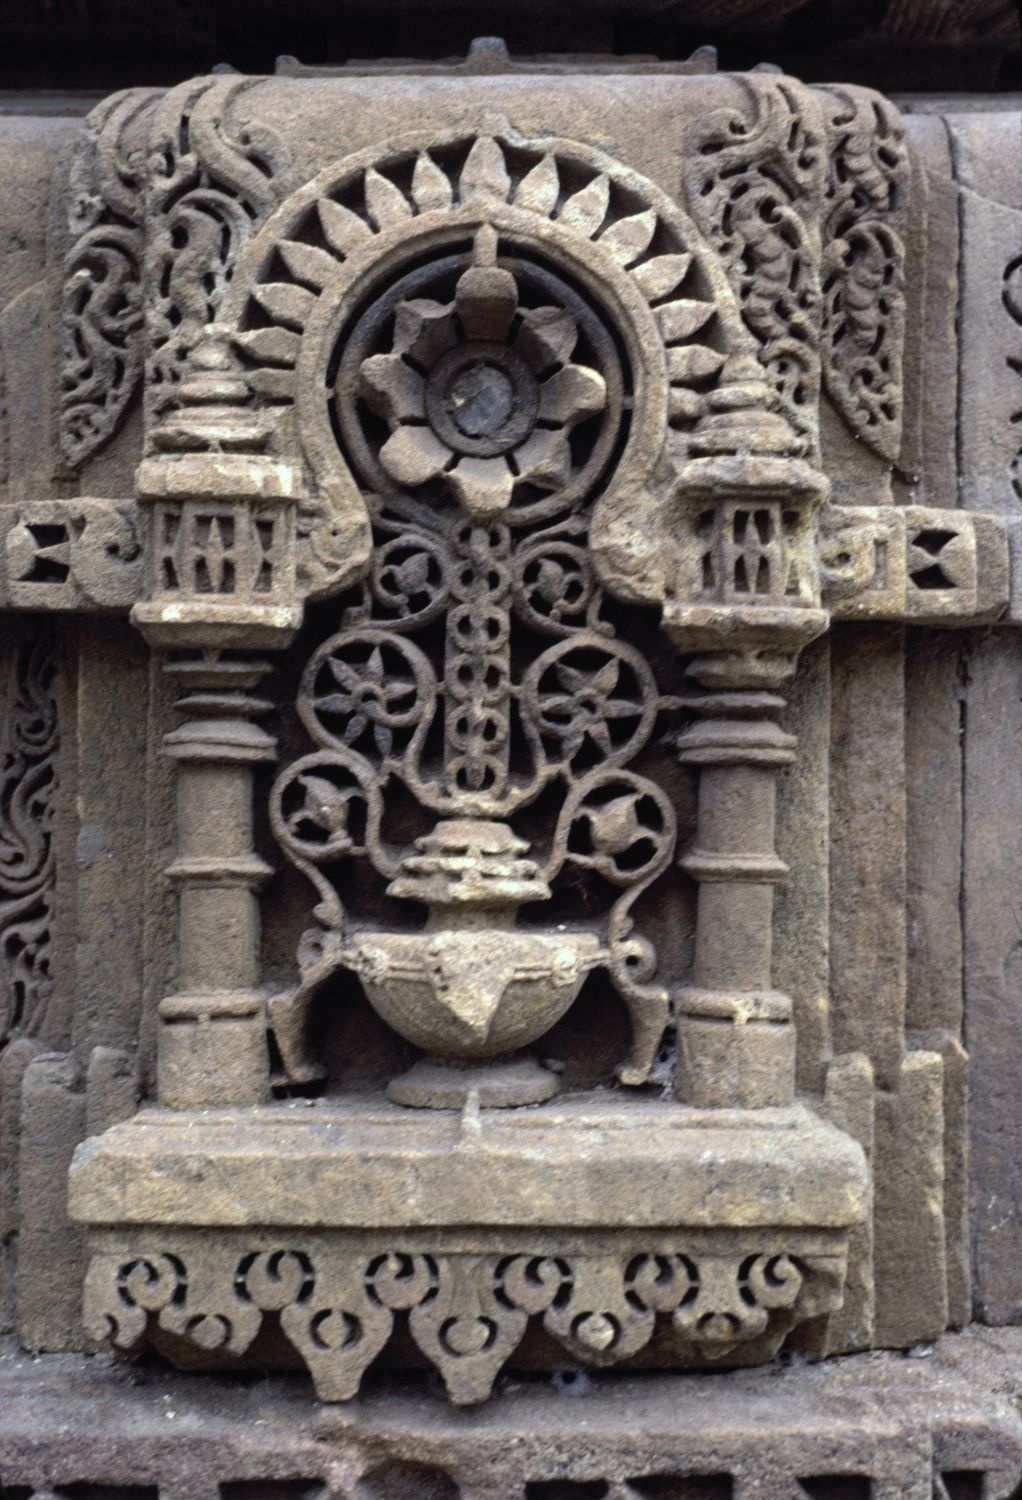 Detail view of carved motif on minaret showing vase, scrolling vine, and large flower within a niche.